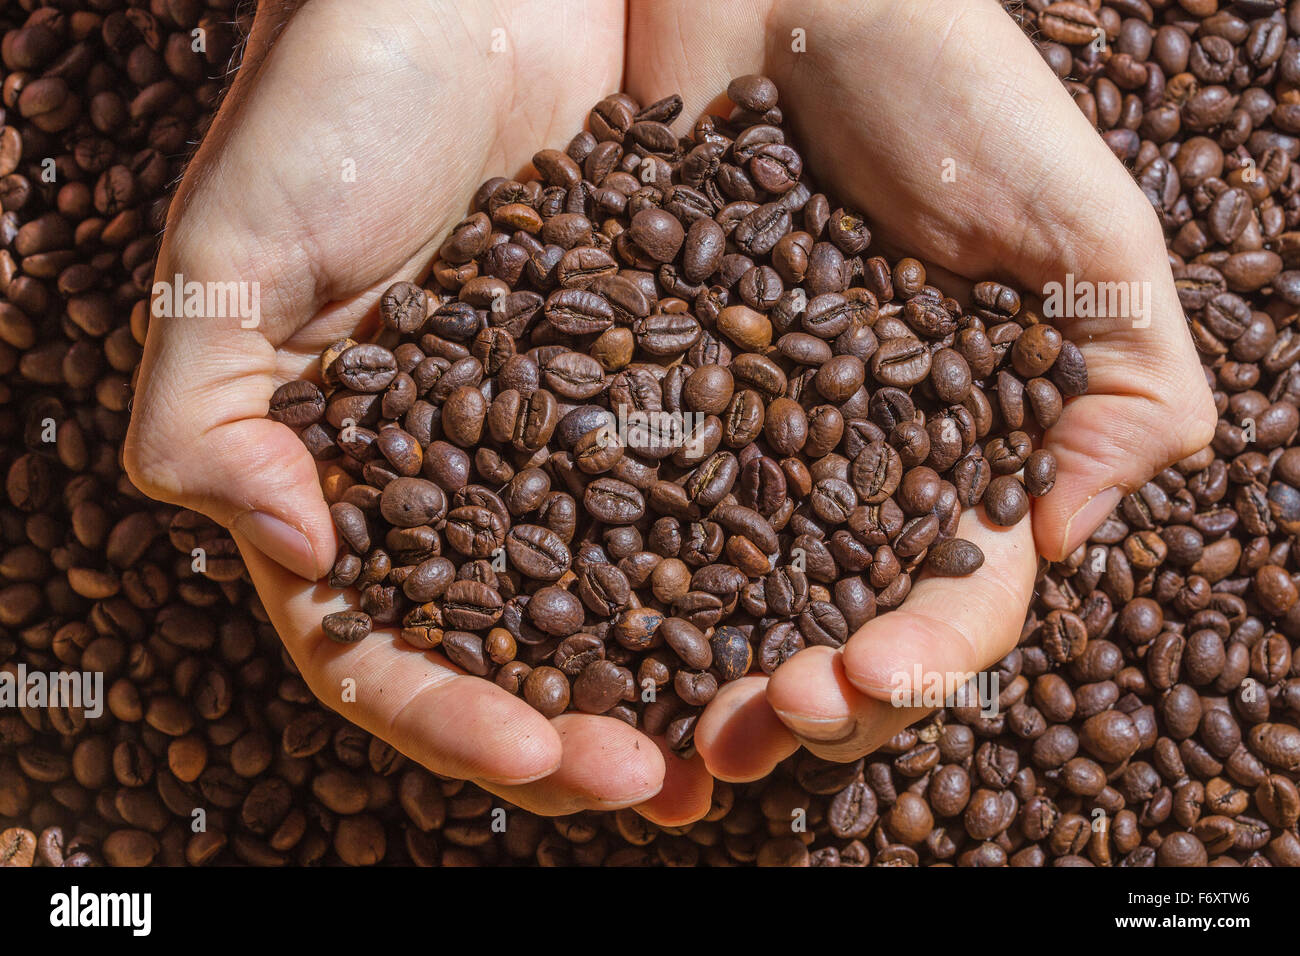 Hands of a man holding a handful of roasted brown coffee beans. Coffee beans as uniform background. Stock Photo